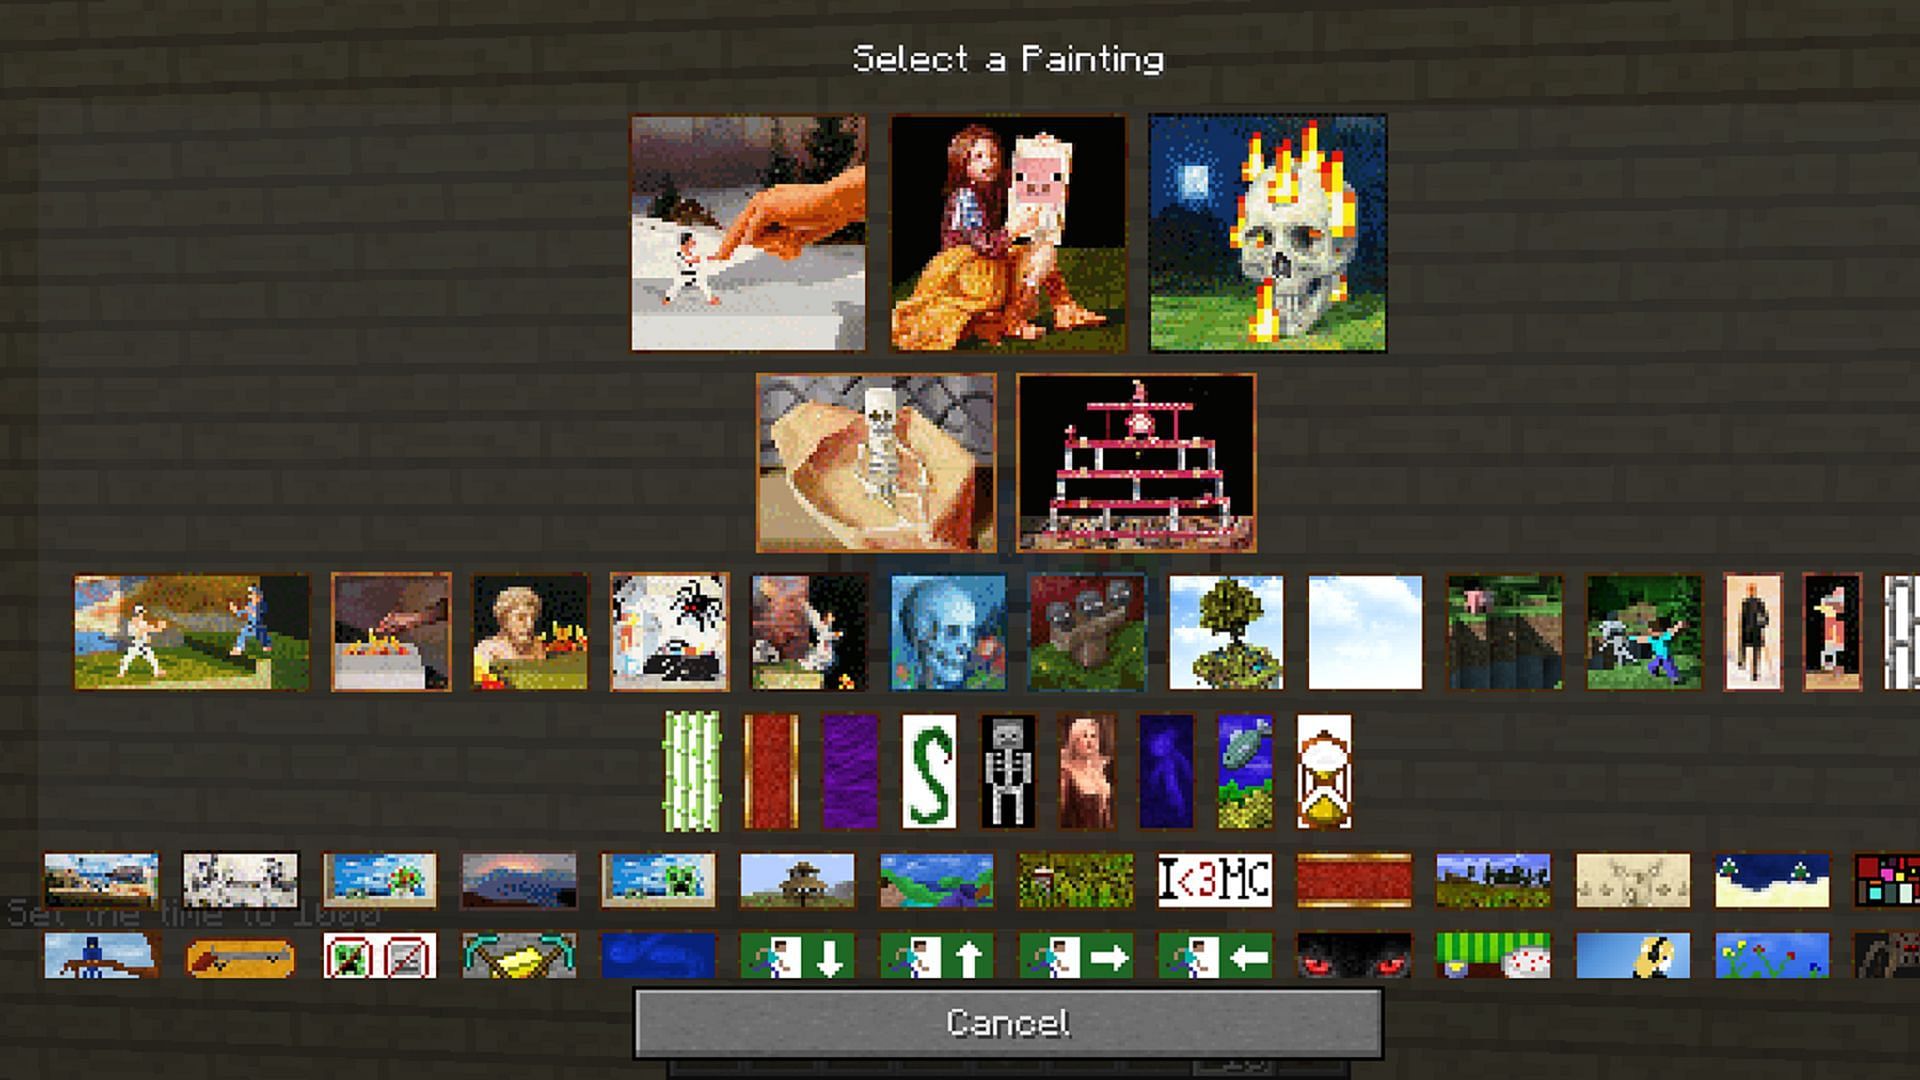 The painting selection menu of Paintings ++ (Image via AbsolemJackDaw/CurseForge)